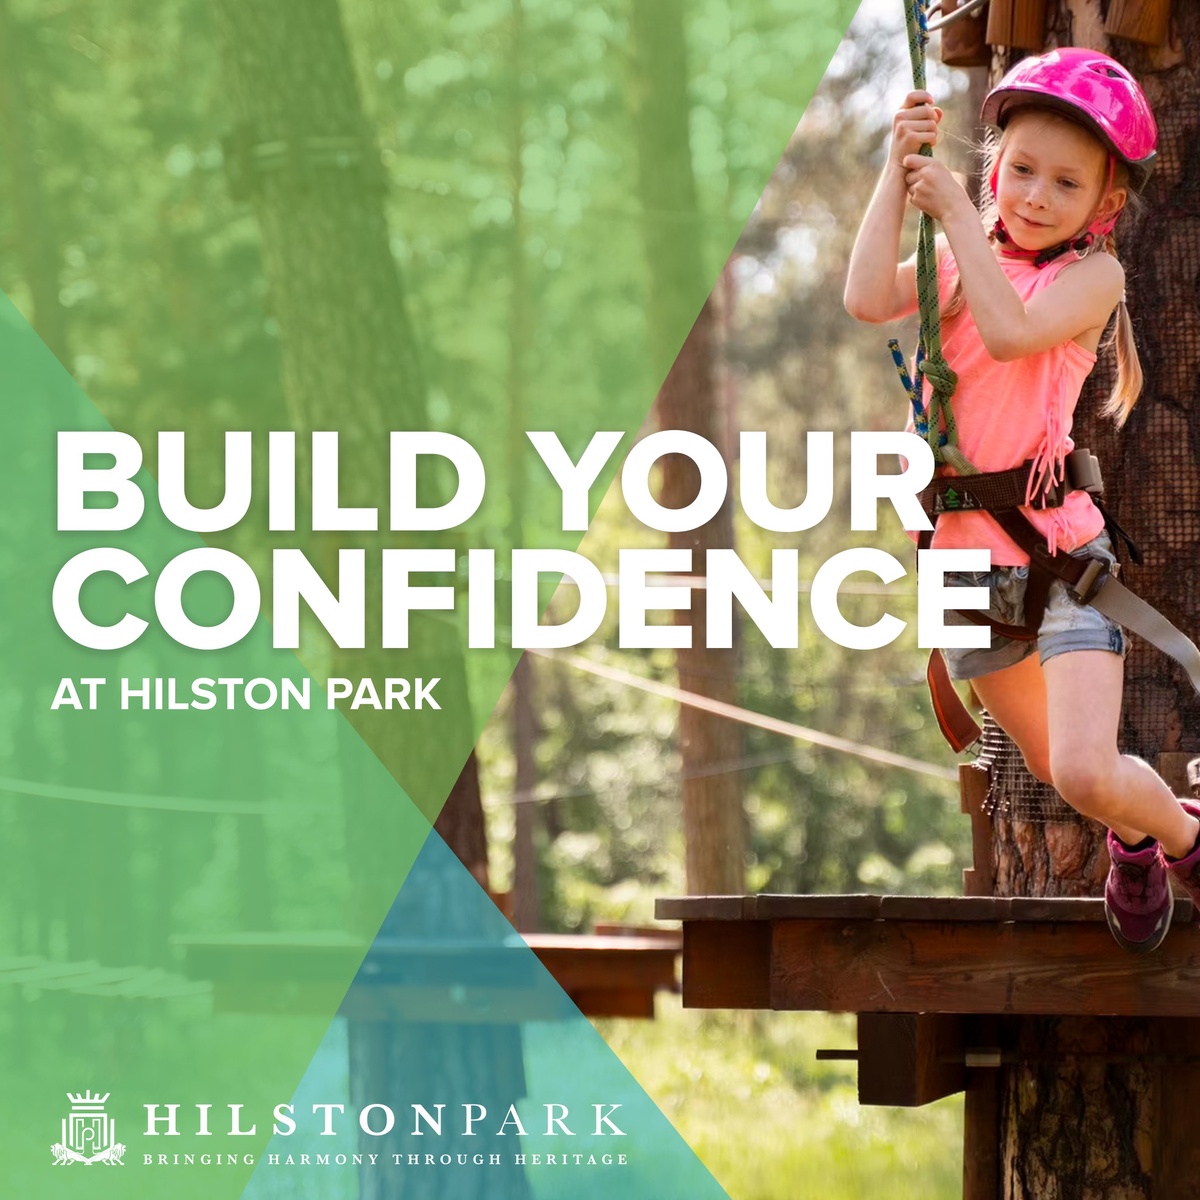 Let's Explore Nature! Embark on an Educational Adventure at Hilston Park